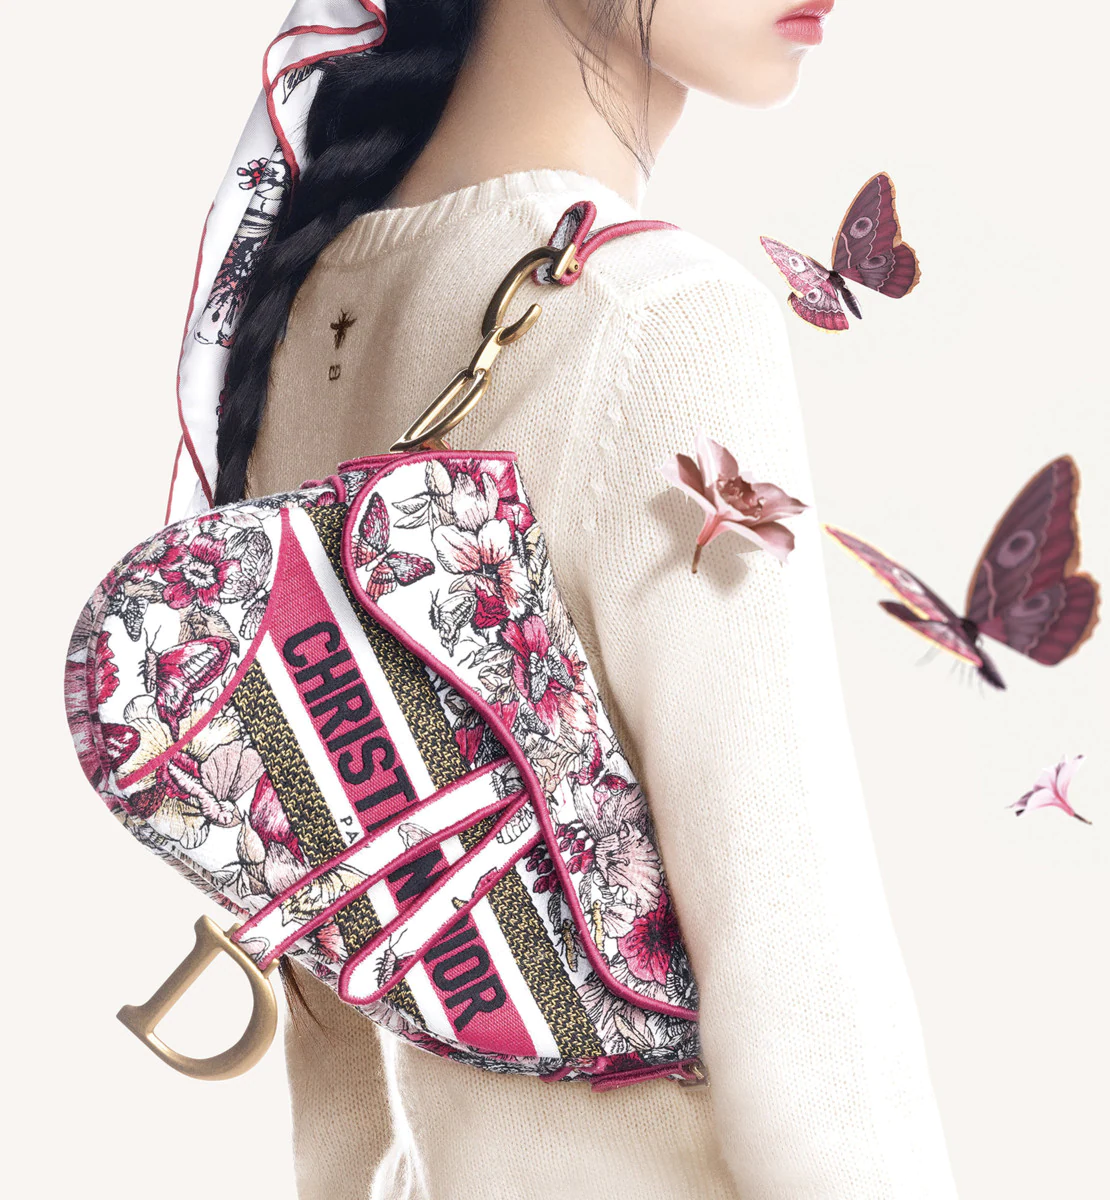 Chinese New Year Louis Vuitton Gifts   rLouisvuitton